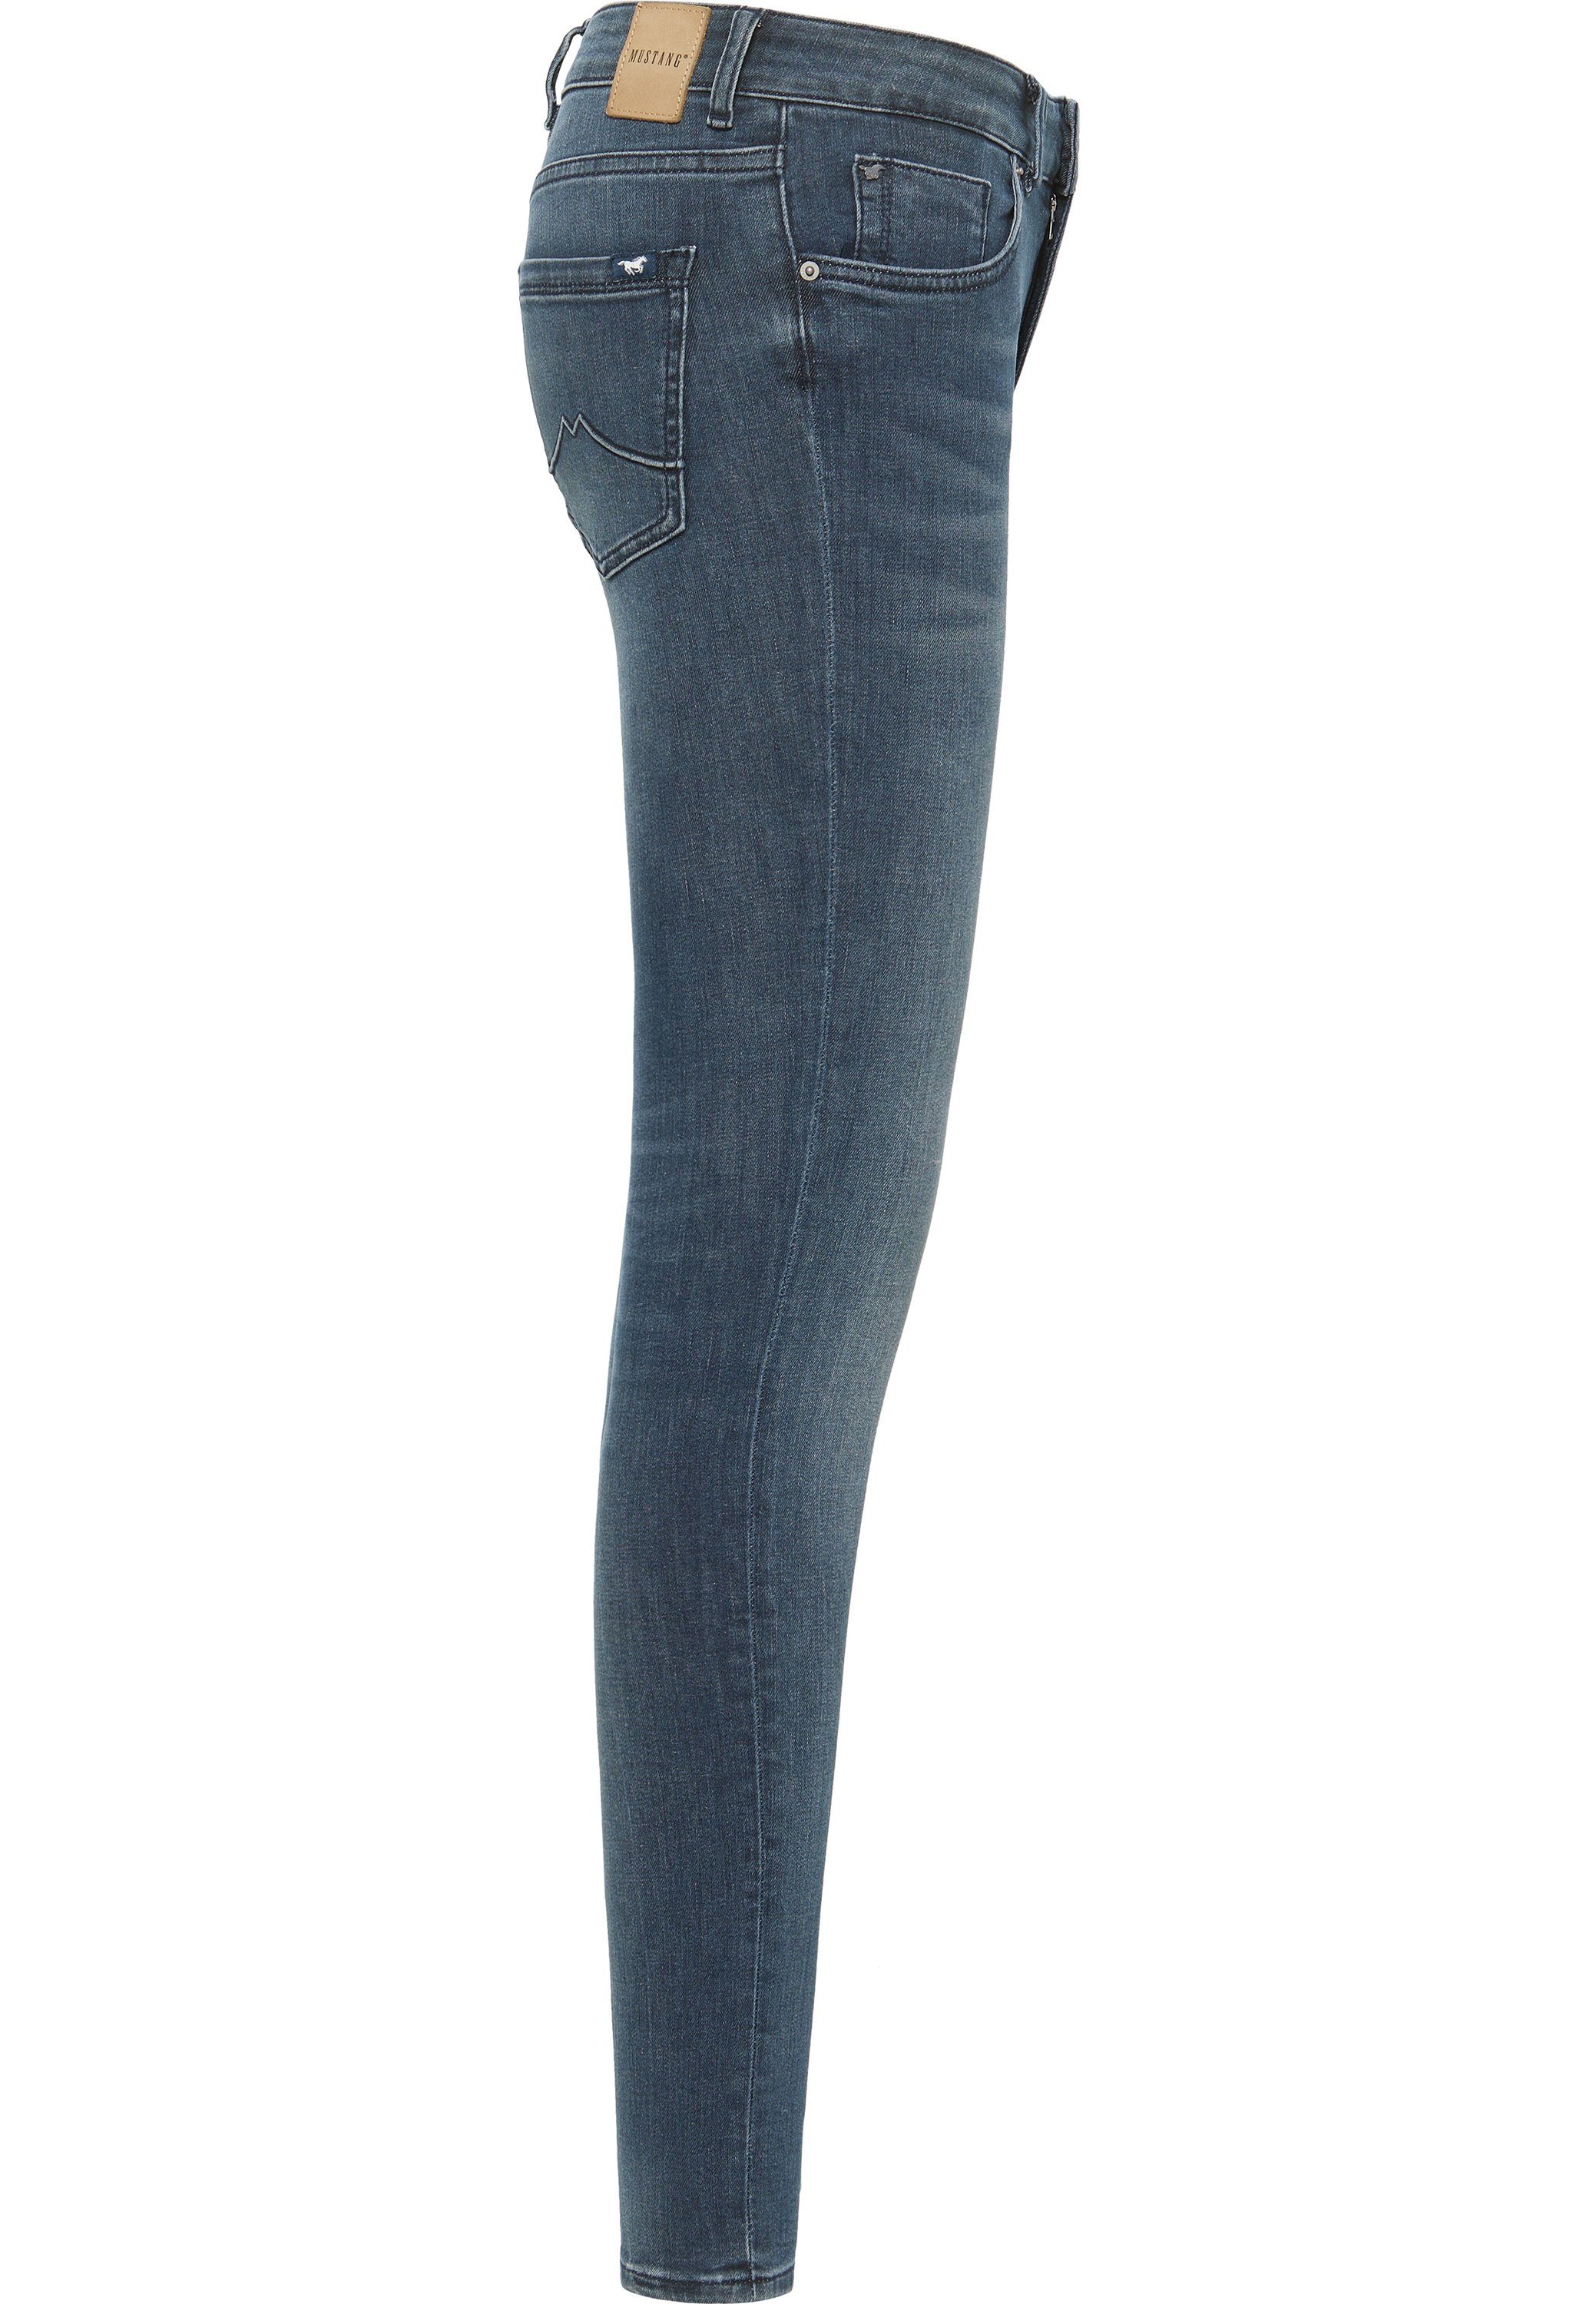 Tragefalten Mustang Hose Shelby Mustang 5-Pocket-Jeans Shelby Used-Waschung Style und MUSTANG Skinny, Style angedeutete Skinny